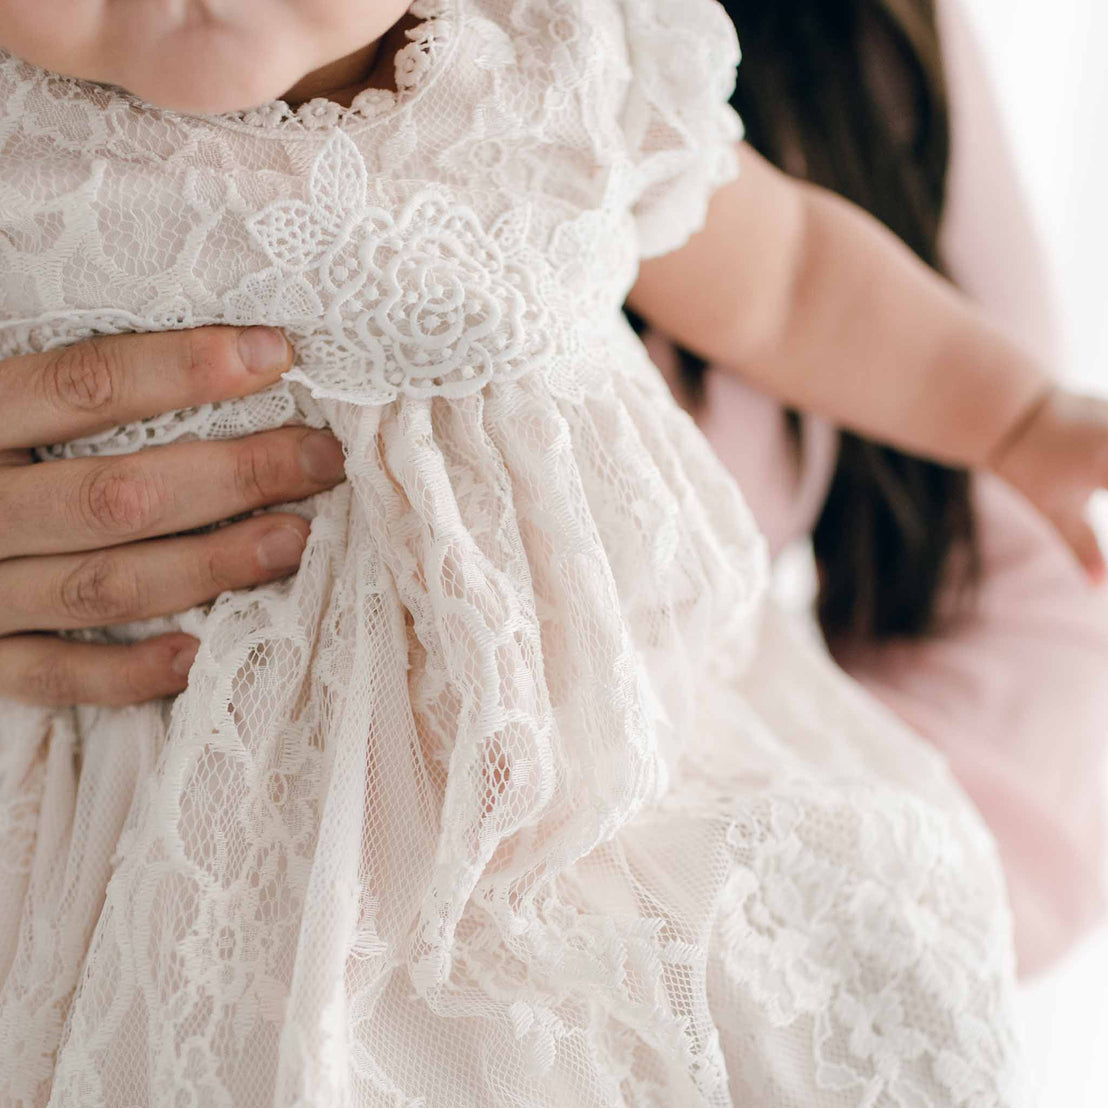 Close-up of a woman holding a child dressed in a Juliette Layette, focusing on the intricate fabric and tender embrace against a soft, light background.